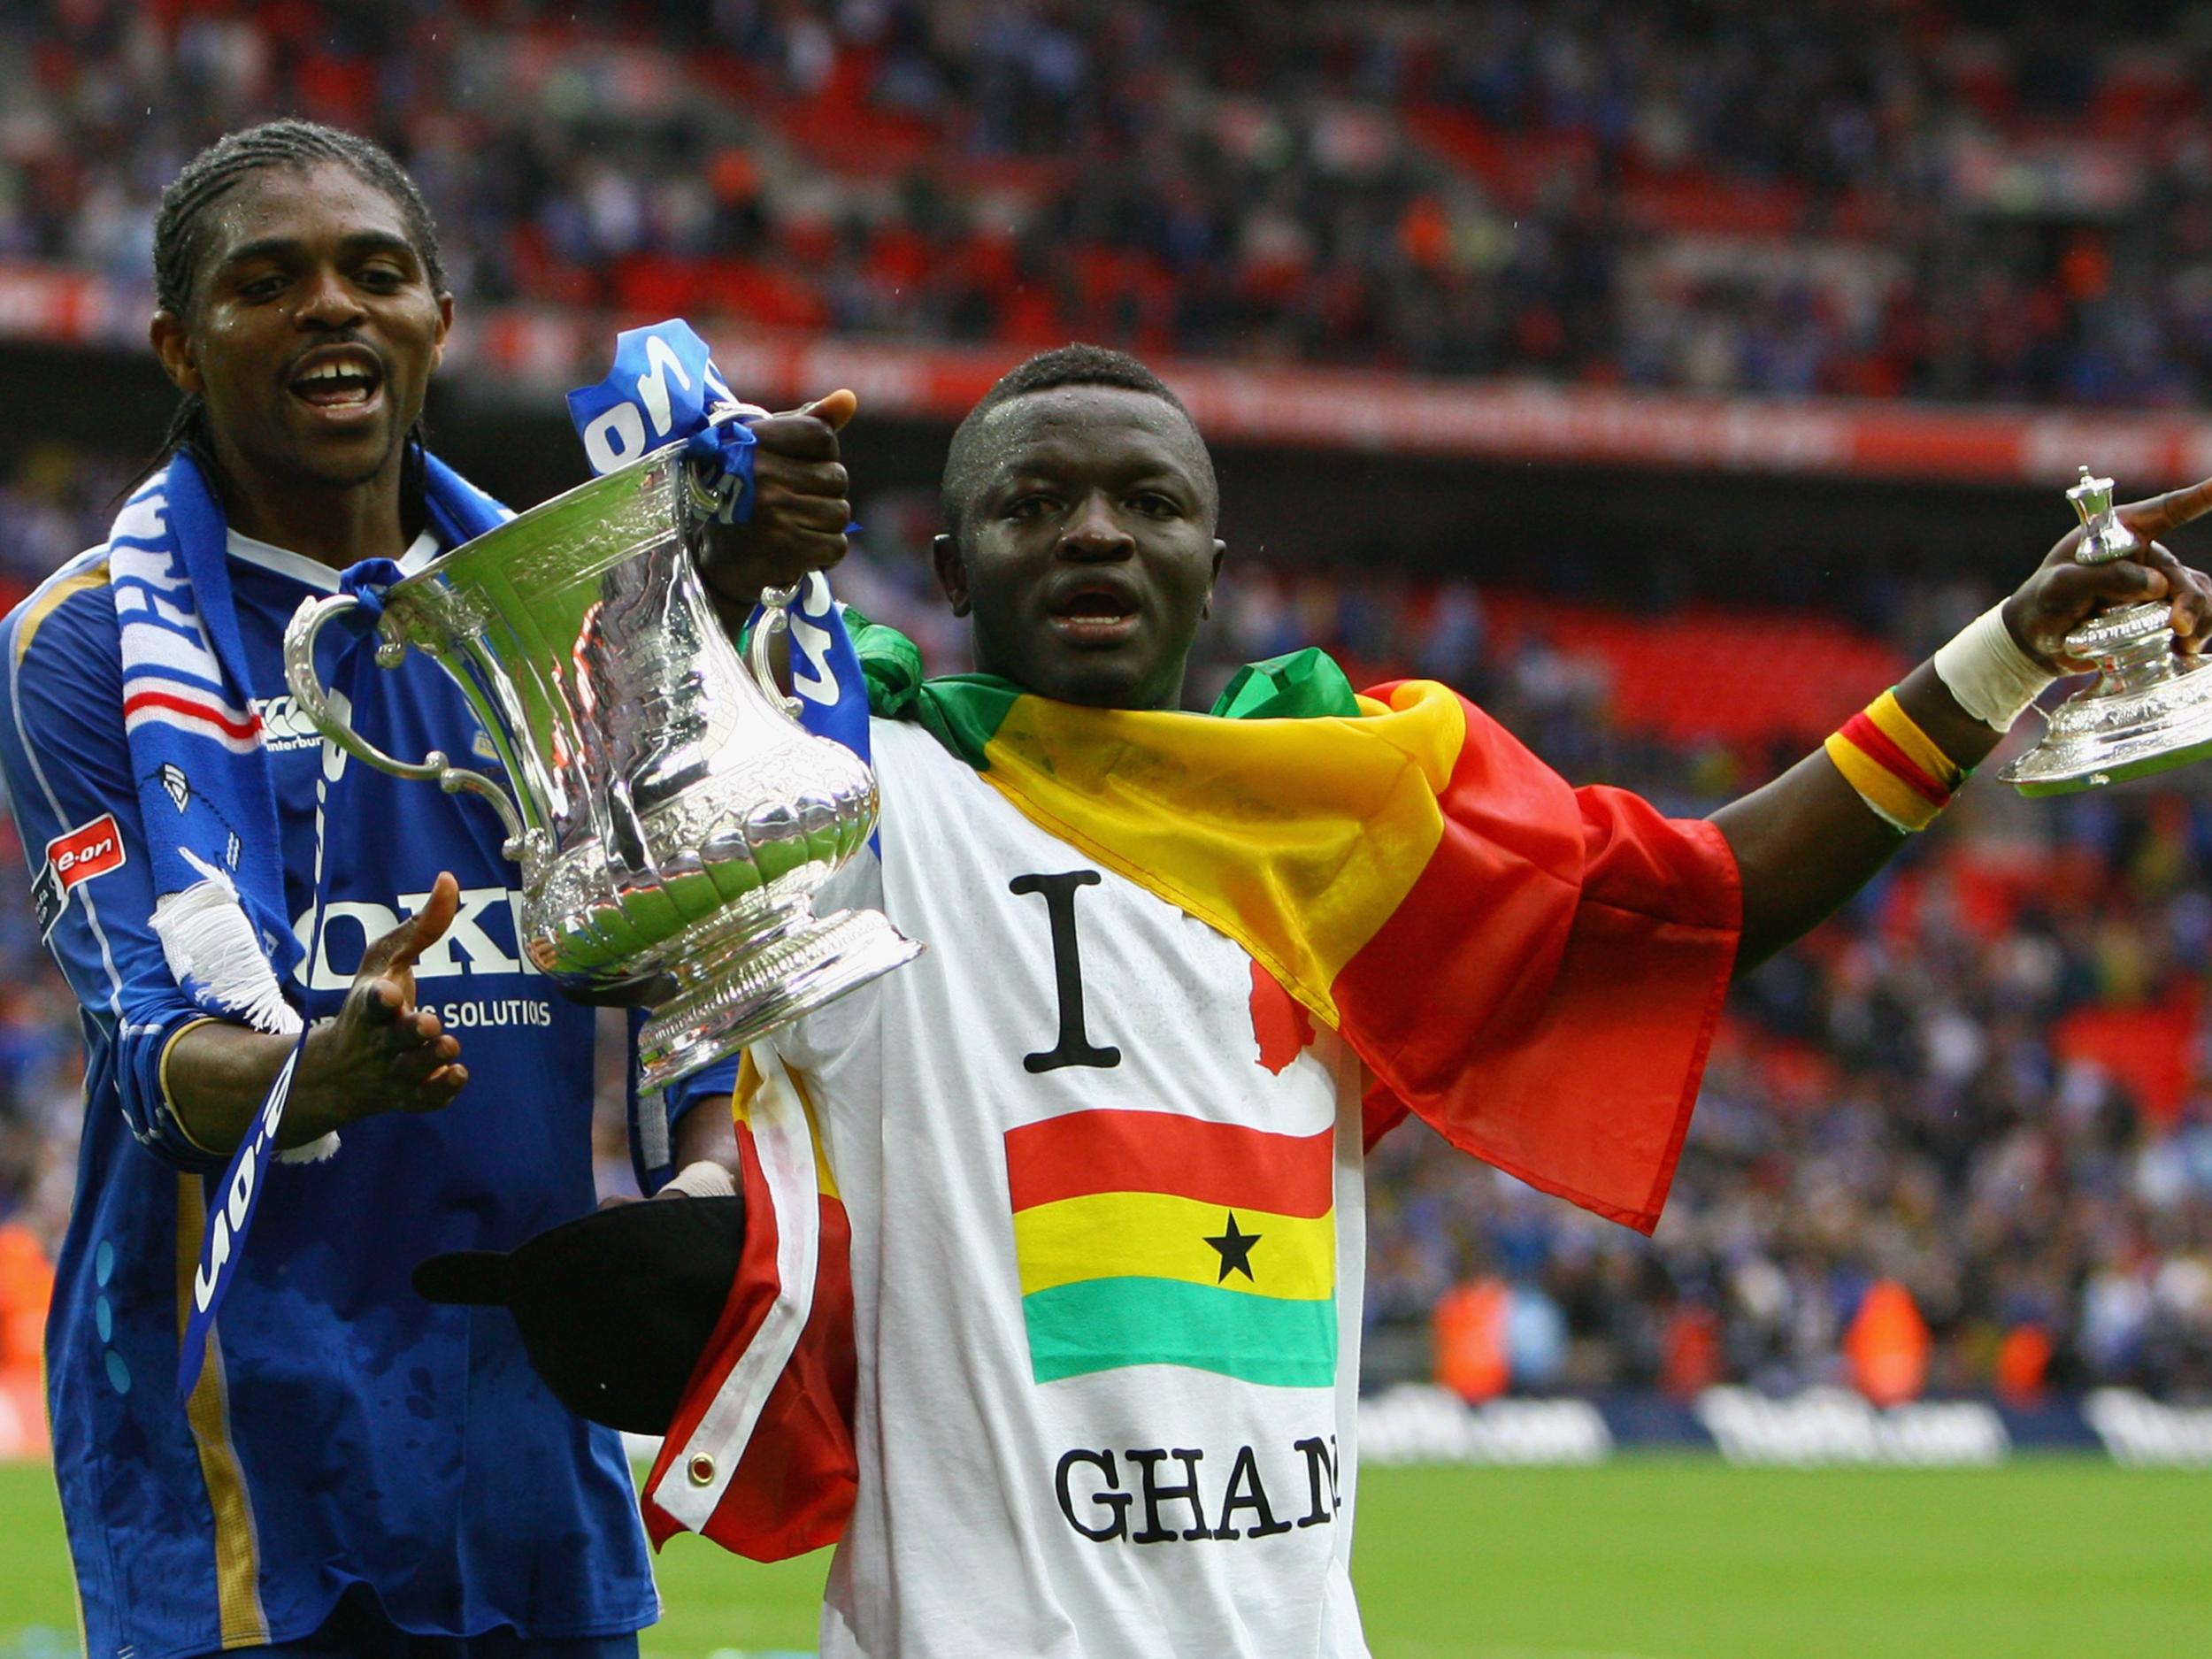 Muntari was a key part of the Portsmouth side that won the FA Cup in 2008